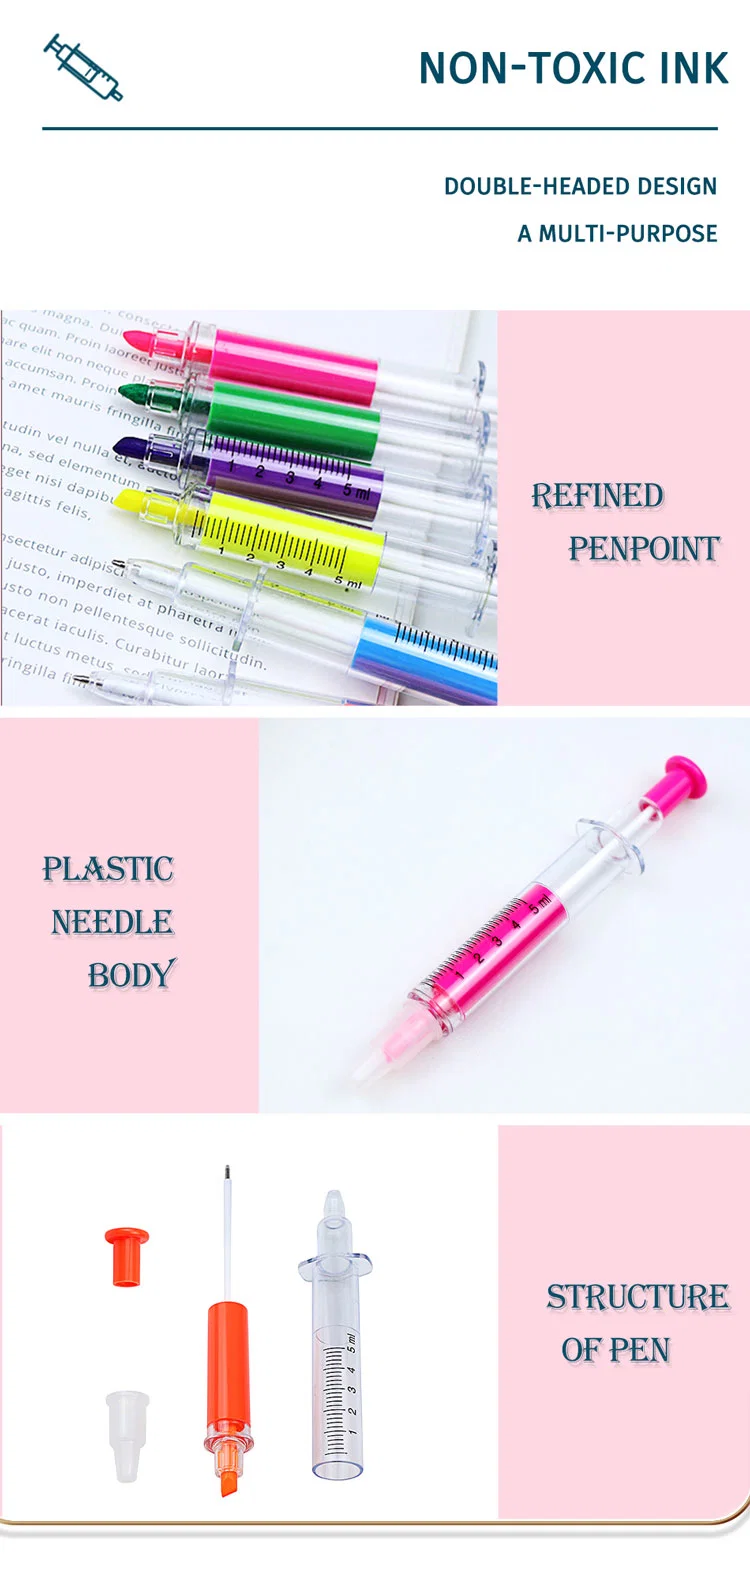 Double-Headed Colored Syringe Injection Shaped Marker Highlighter Pen